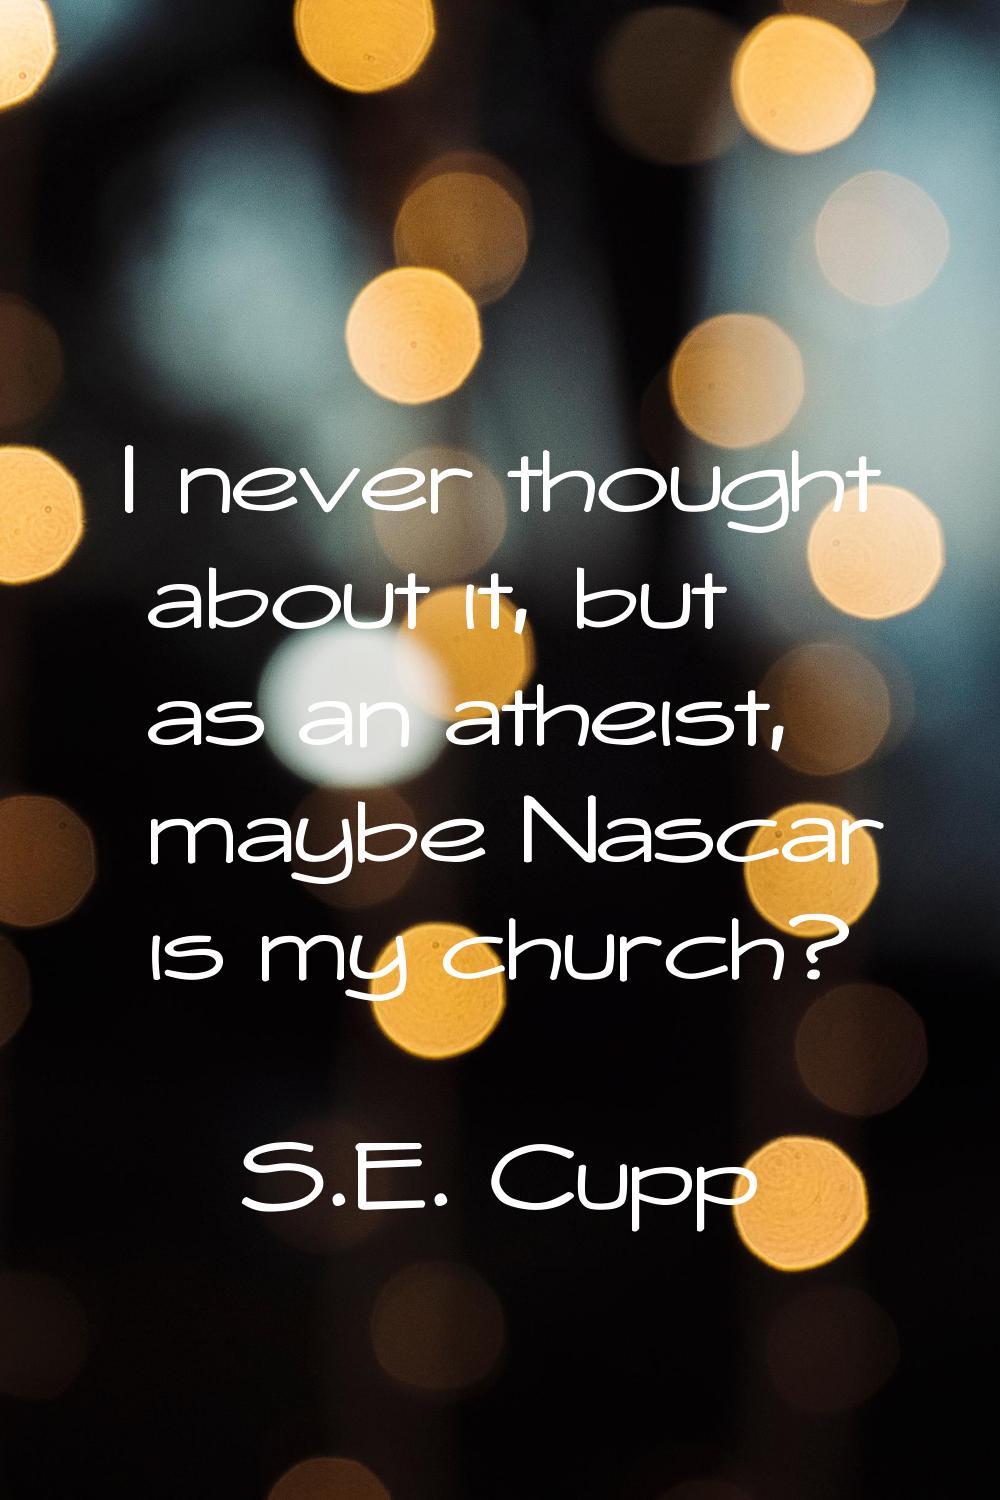 I never thought about it, but as an atheist, maybe Nascar is my church?